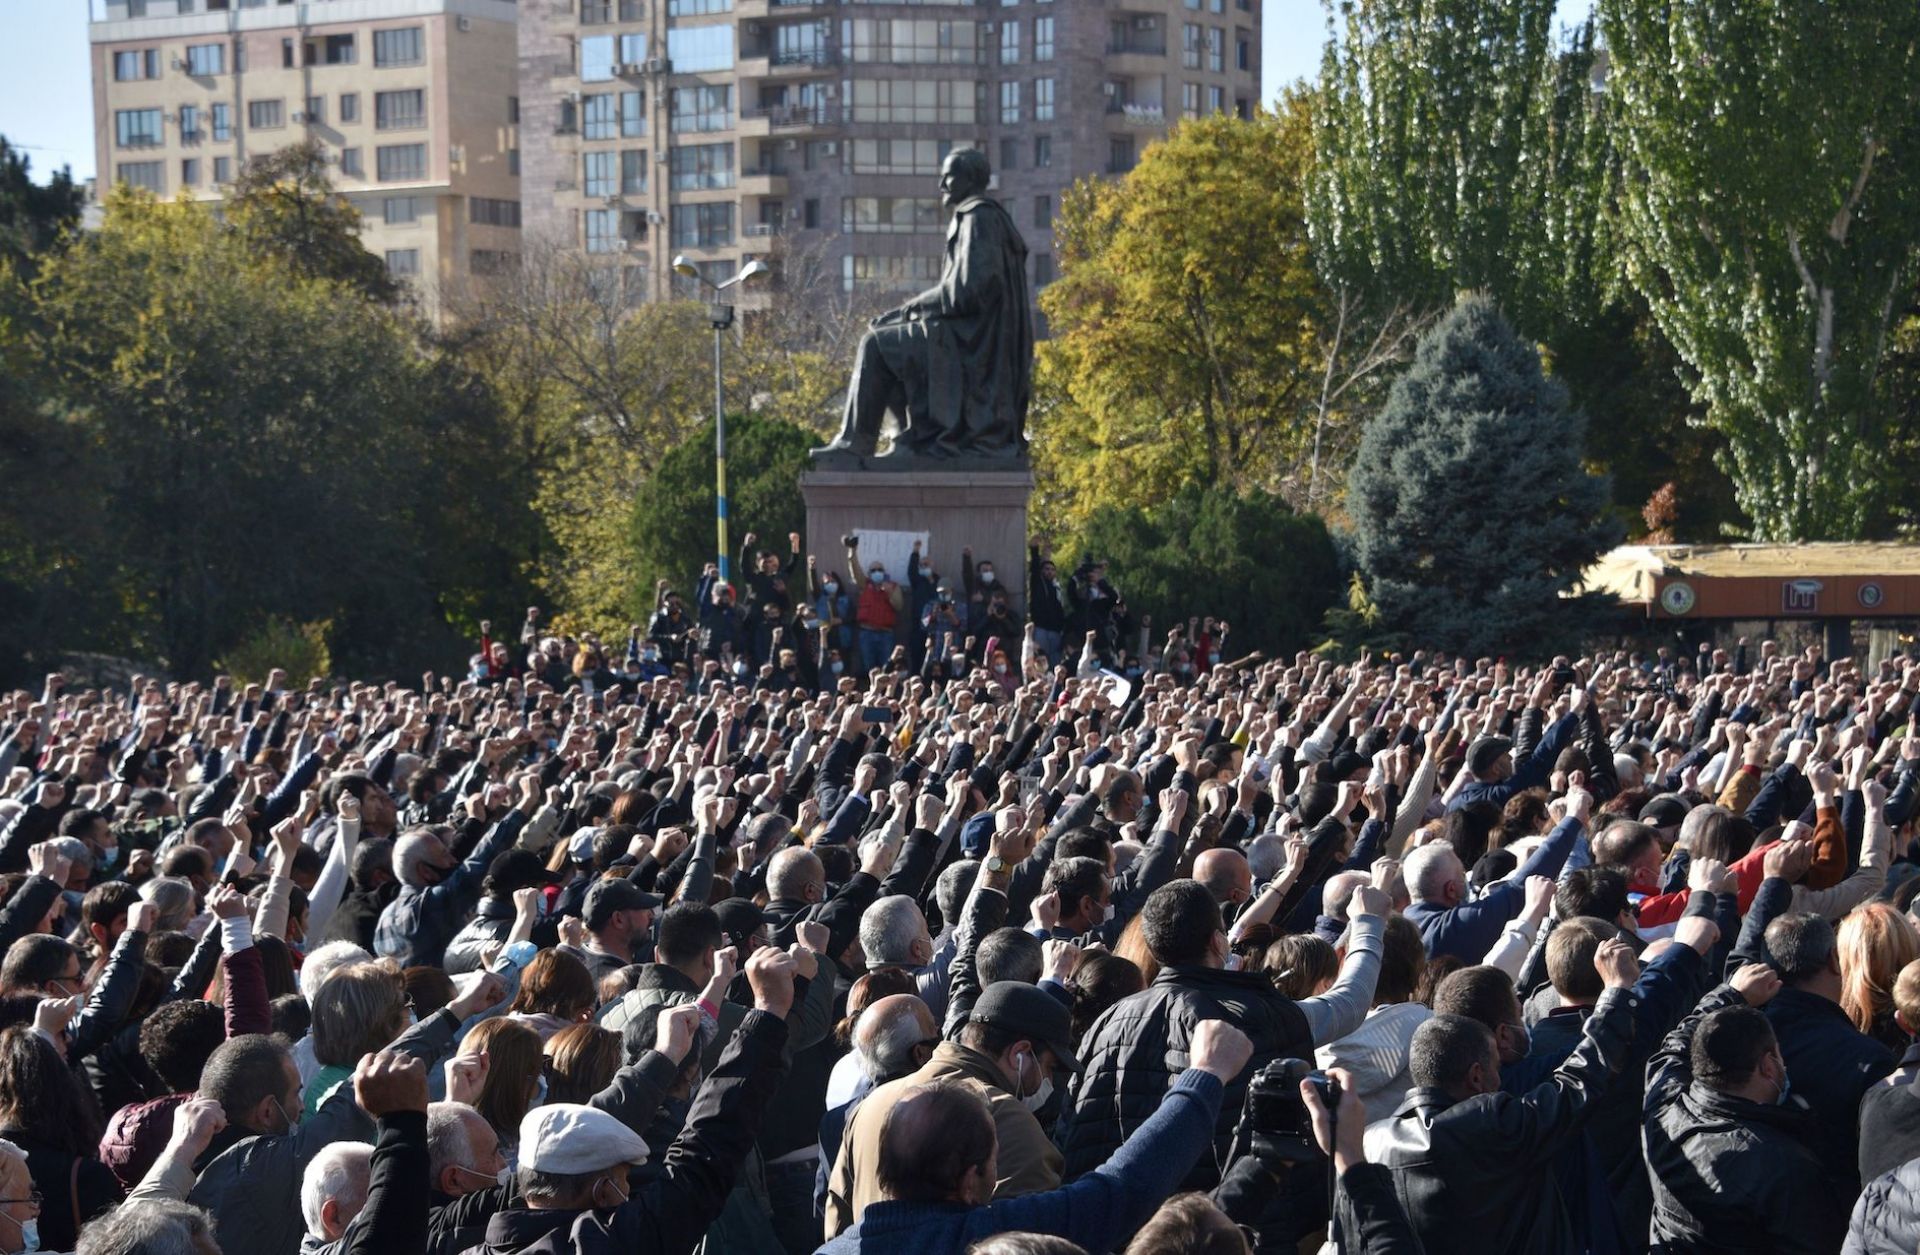 Armenians gather in Yerevan on Nov. 11, 2020, to protest against their country’s agreement to end fighting with Azerbaijan over the disputed Nagorno-Karabakh region.